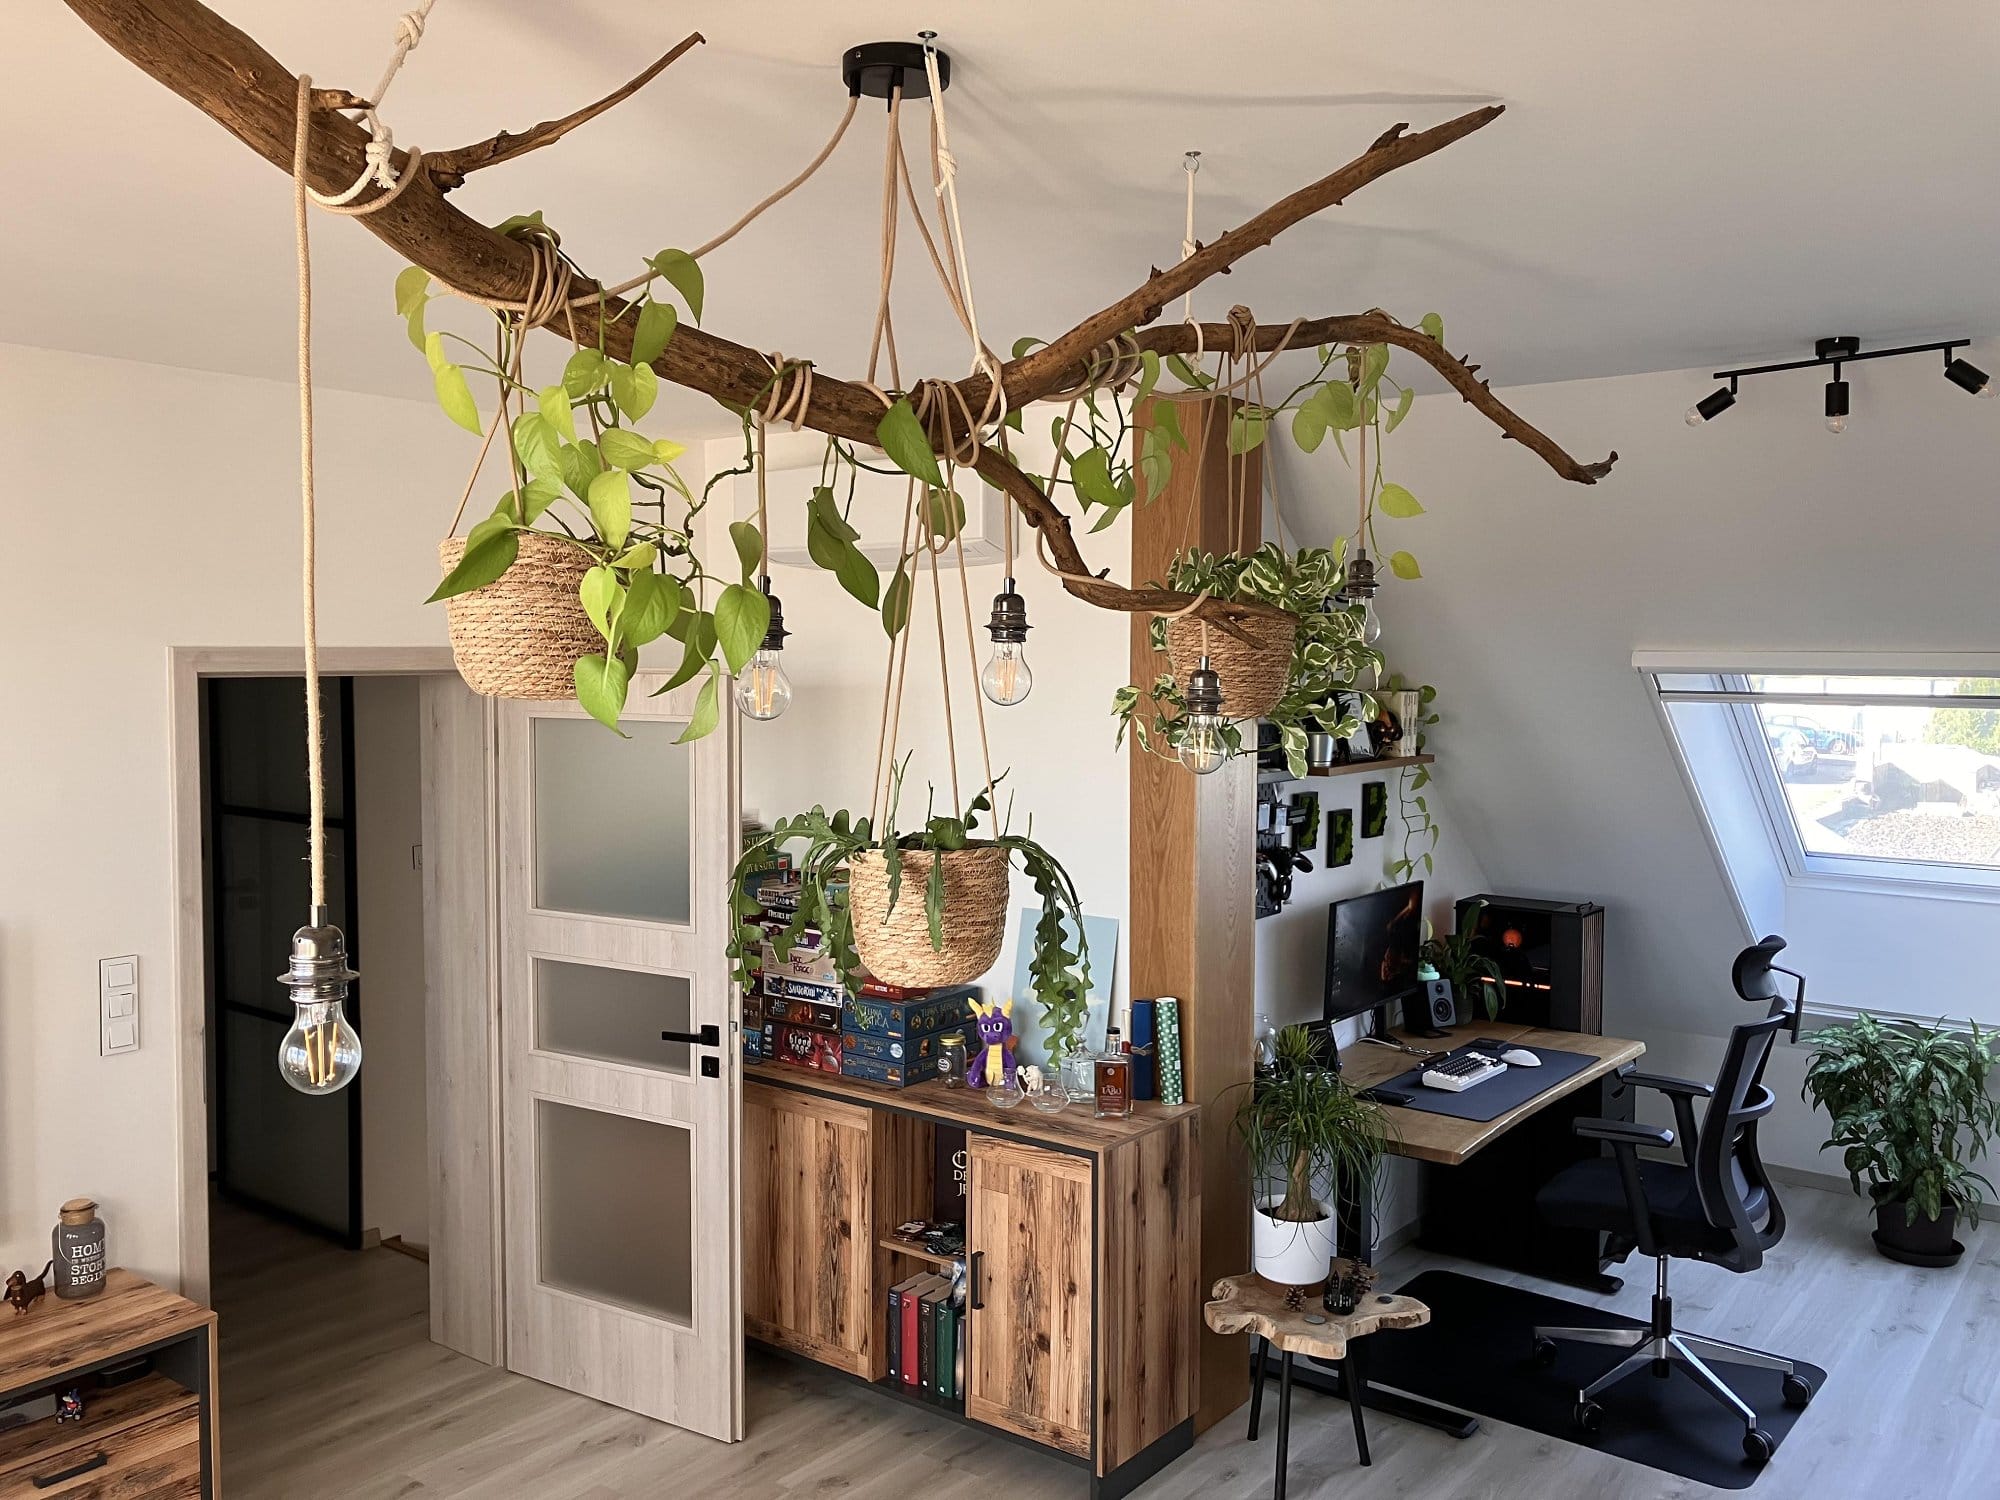 A modern home office featuring a wooden desk with an ergonomic chair, hanging plants from a large branch, natural light from a slanted window, and a cabinet with board games